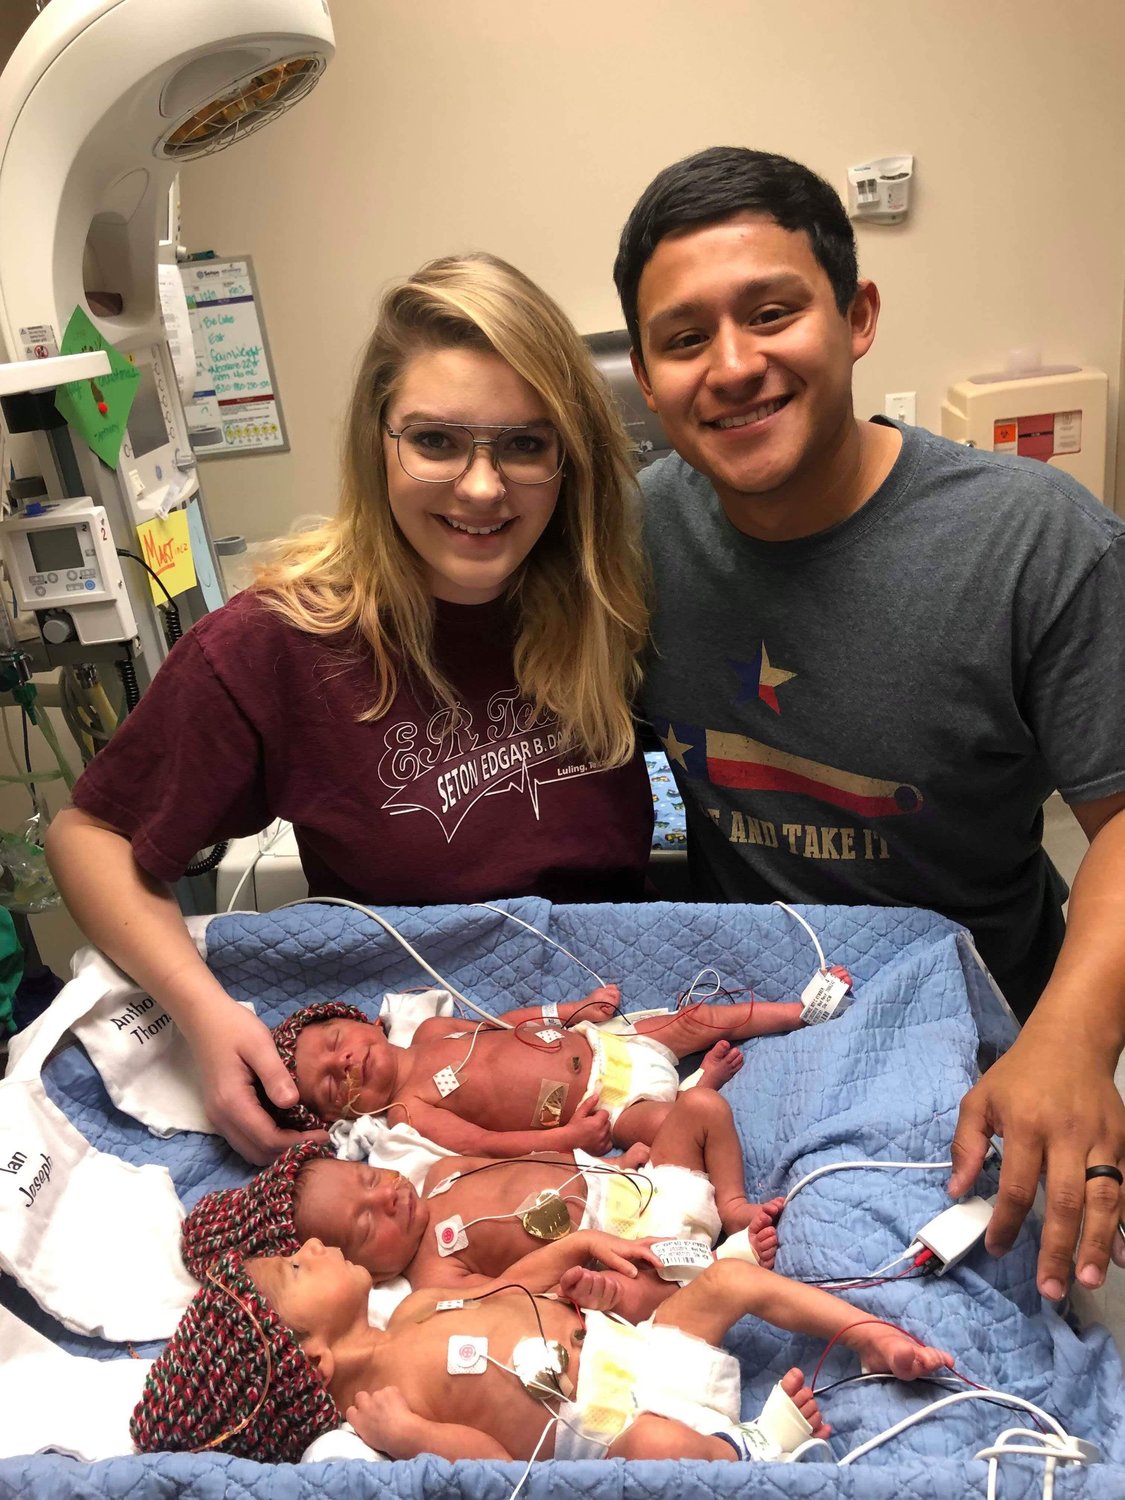 Gonzales natives Kymber and Evan Martinez brought home their new set of triplets earlier this month. Kymber and Evan are headed back to Gonzales next month with little Ian Joseph, Anthony Thomas, Sebastian Michael and their big sister Jayden.